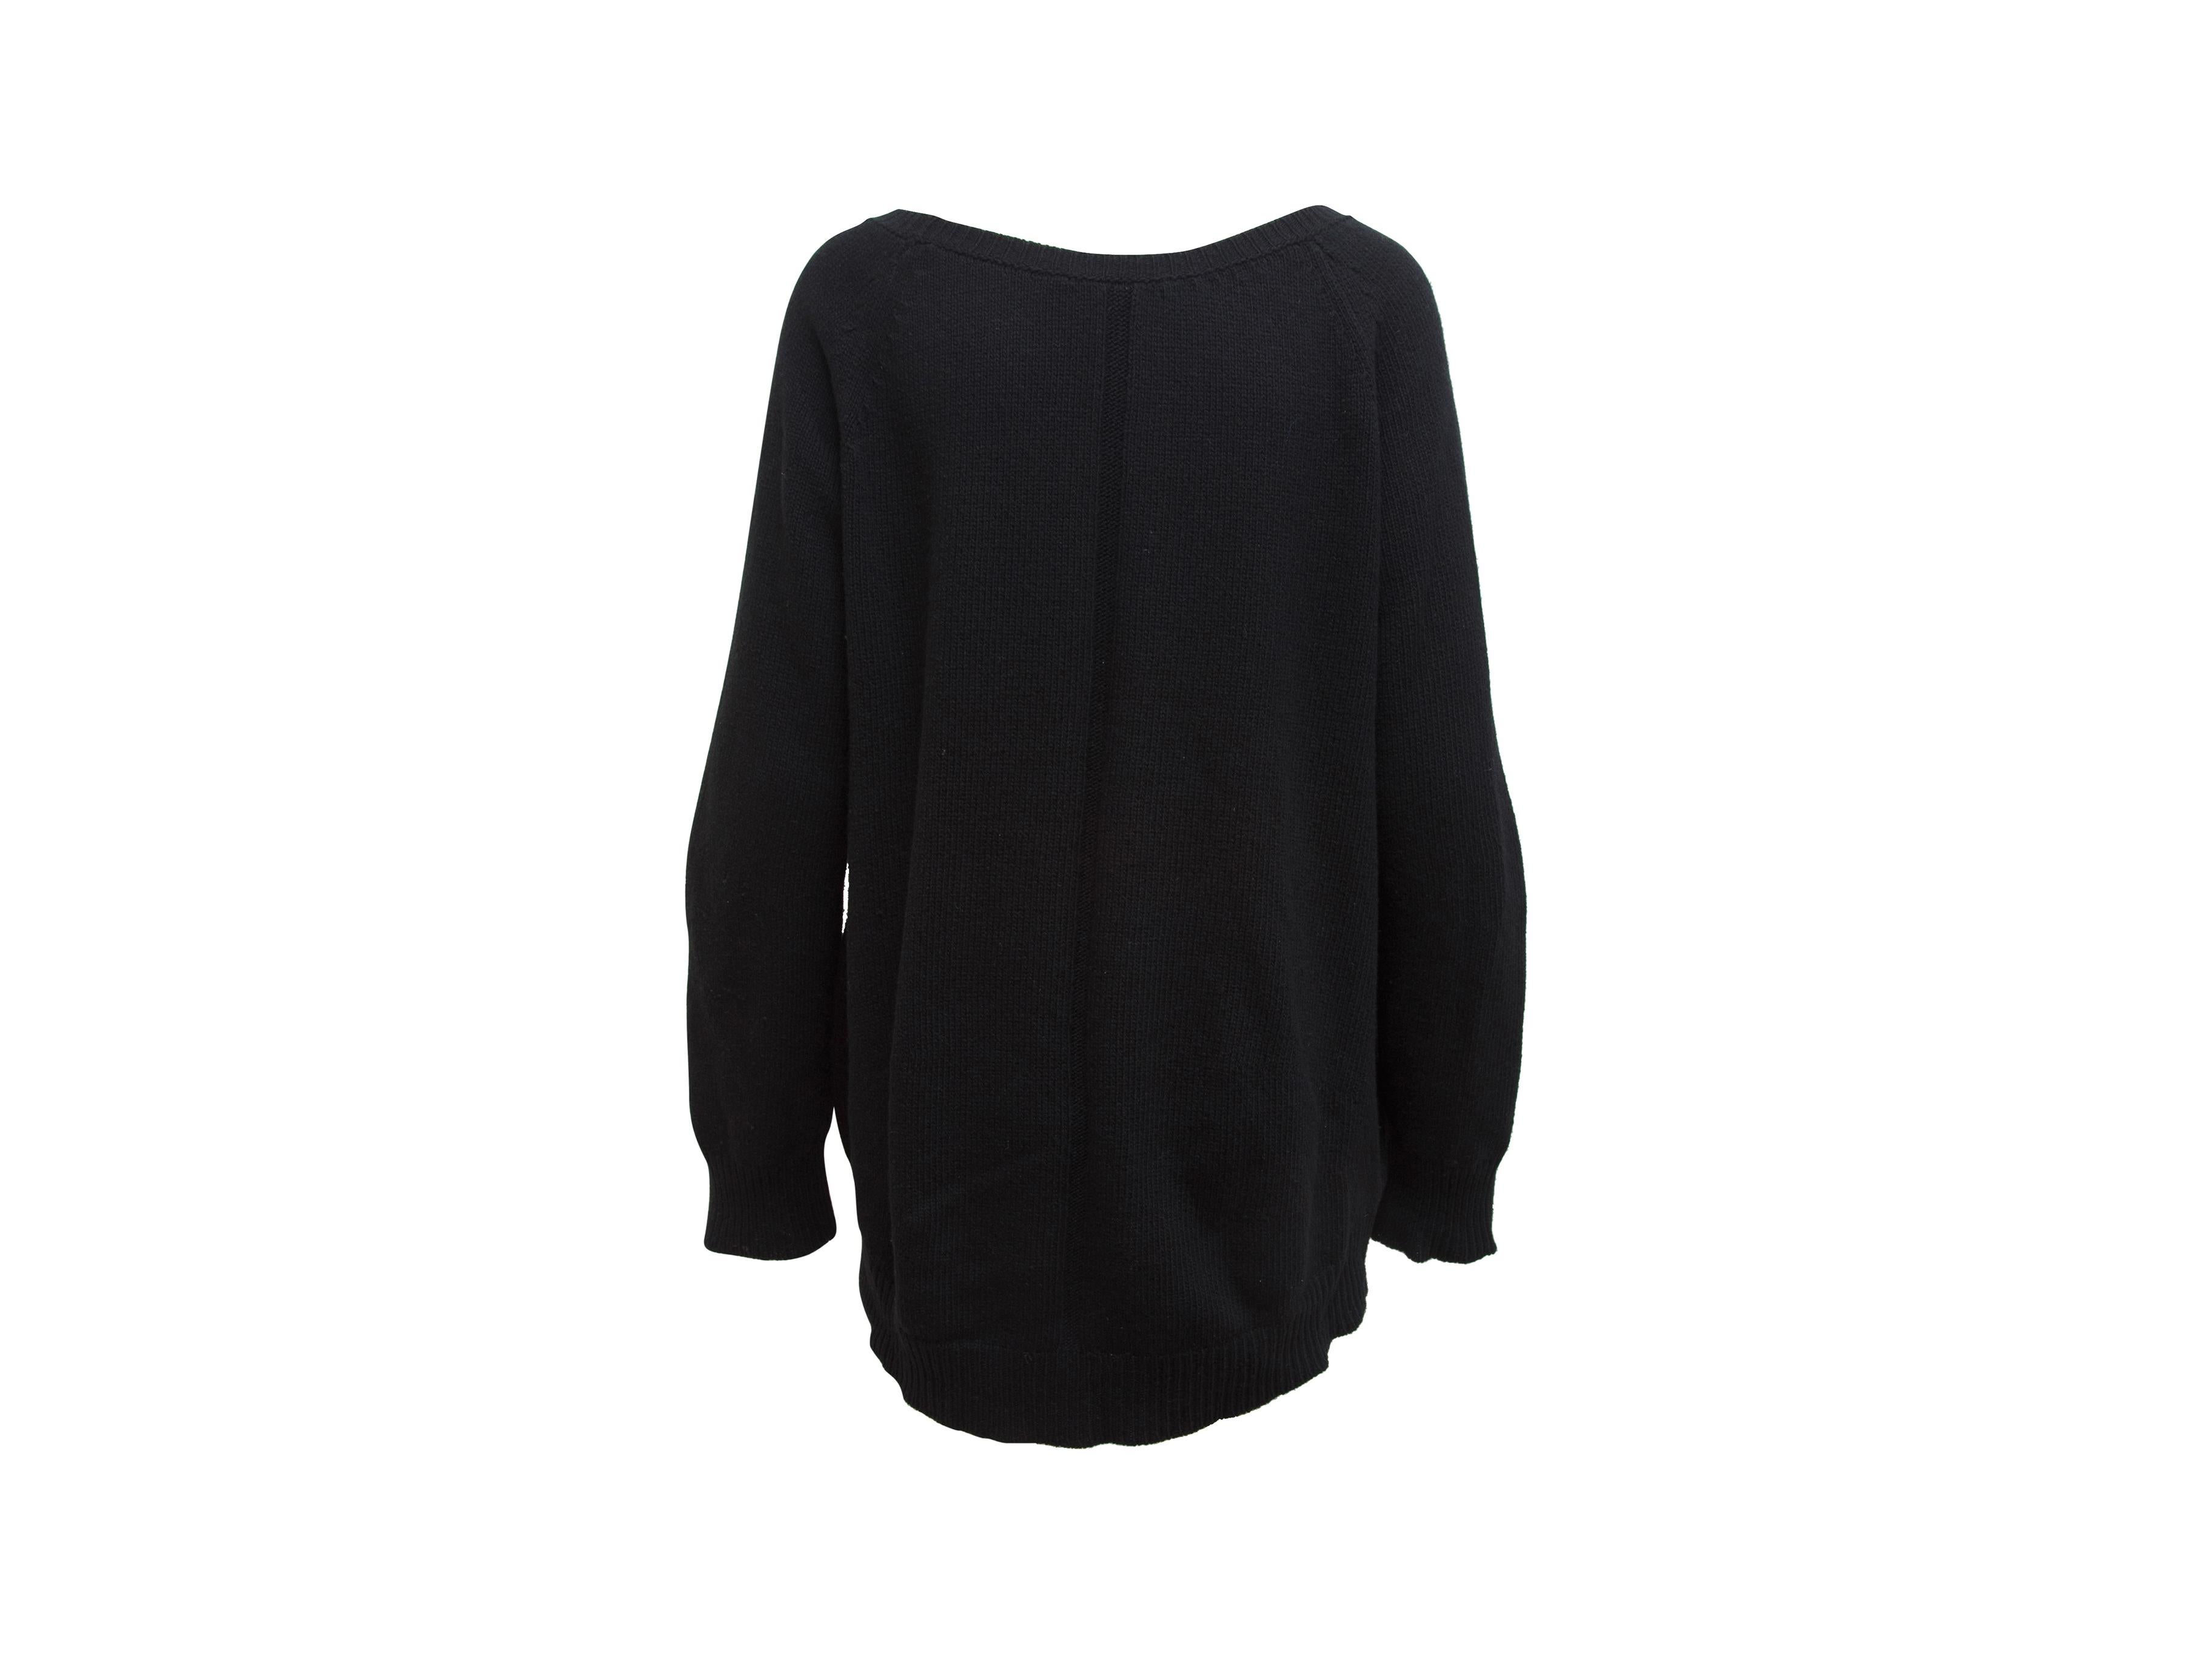 Product details: Black The Row Scoop Neck Sweater. This long sleeve sweater from The Row has ribbed cuffs and hem. 42